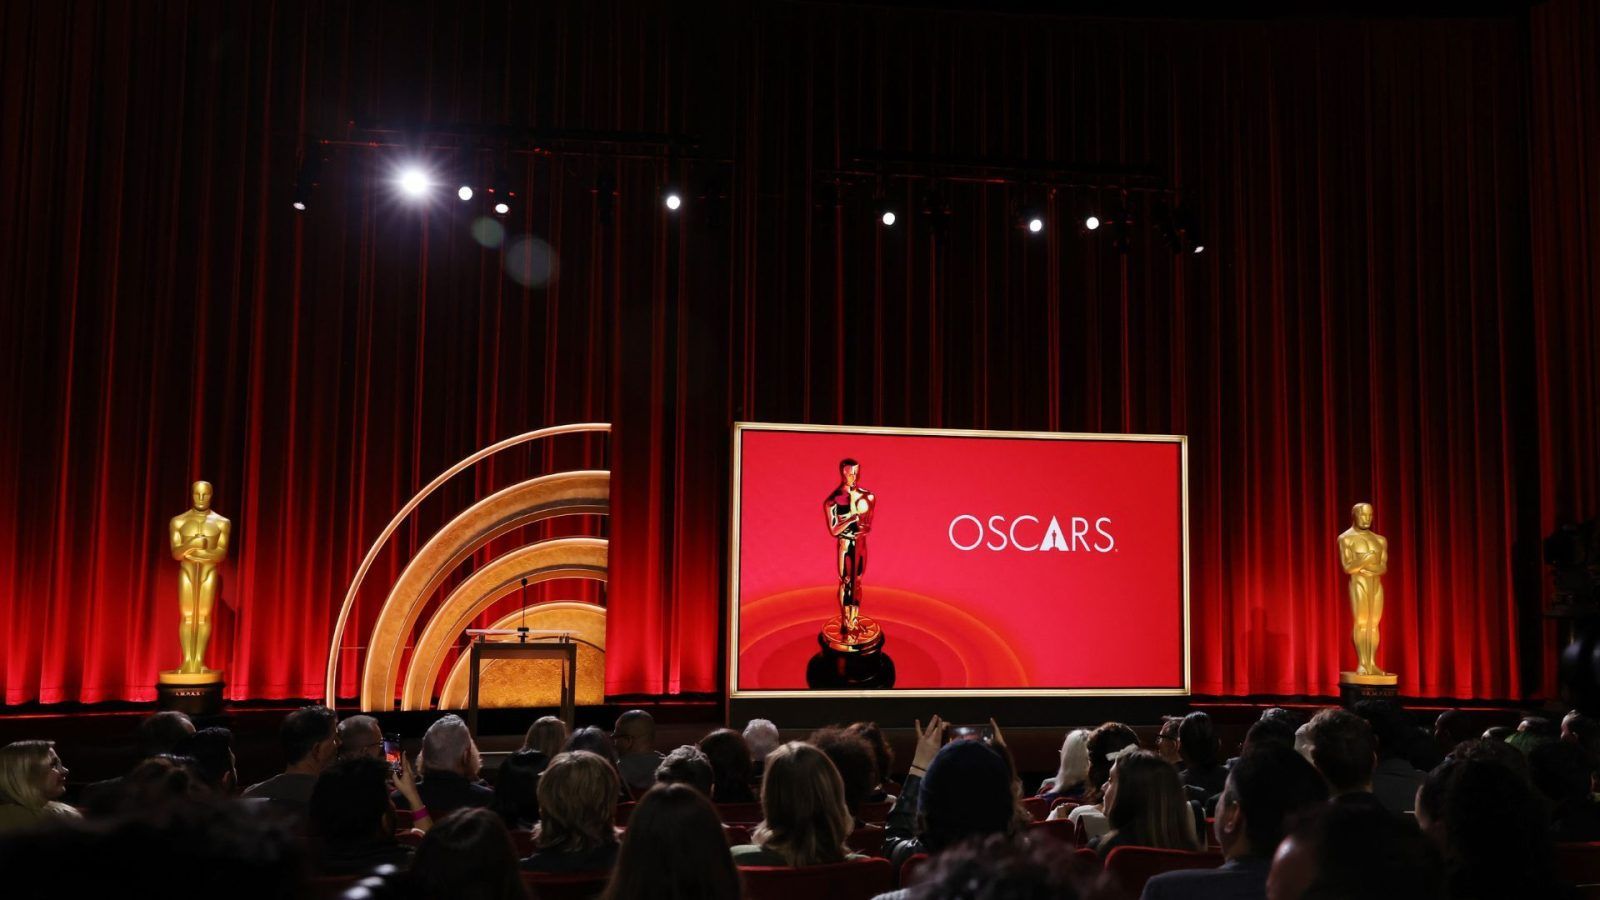 Oscar's gift bags The most extravagant and expensive items